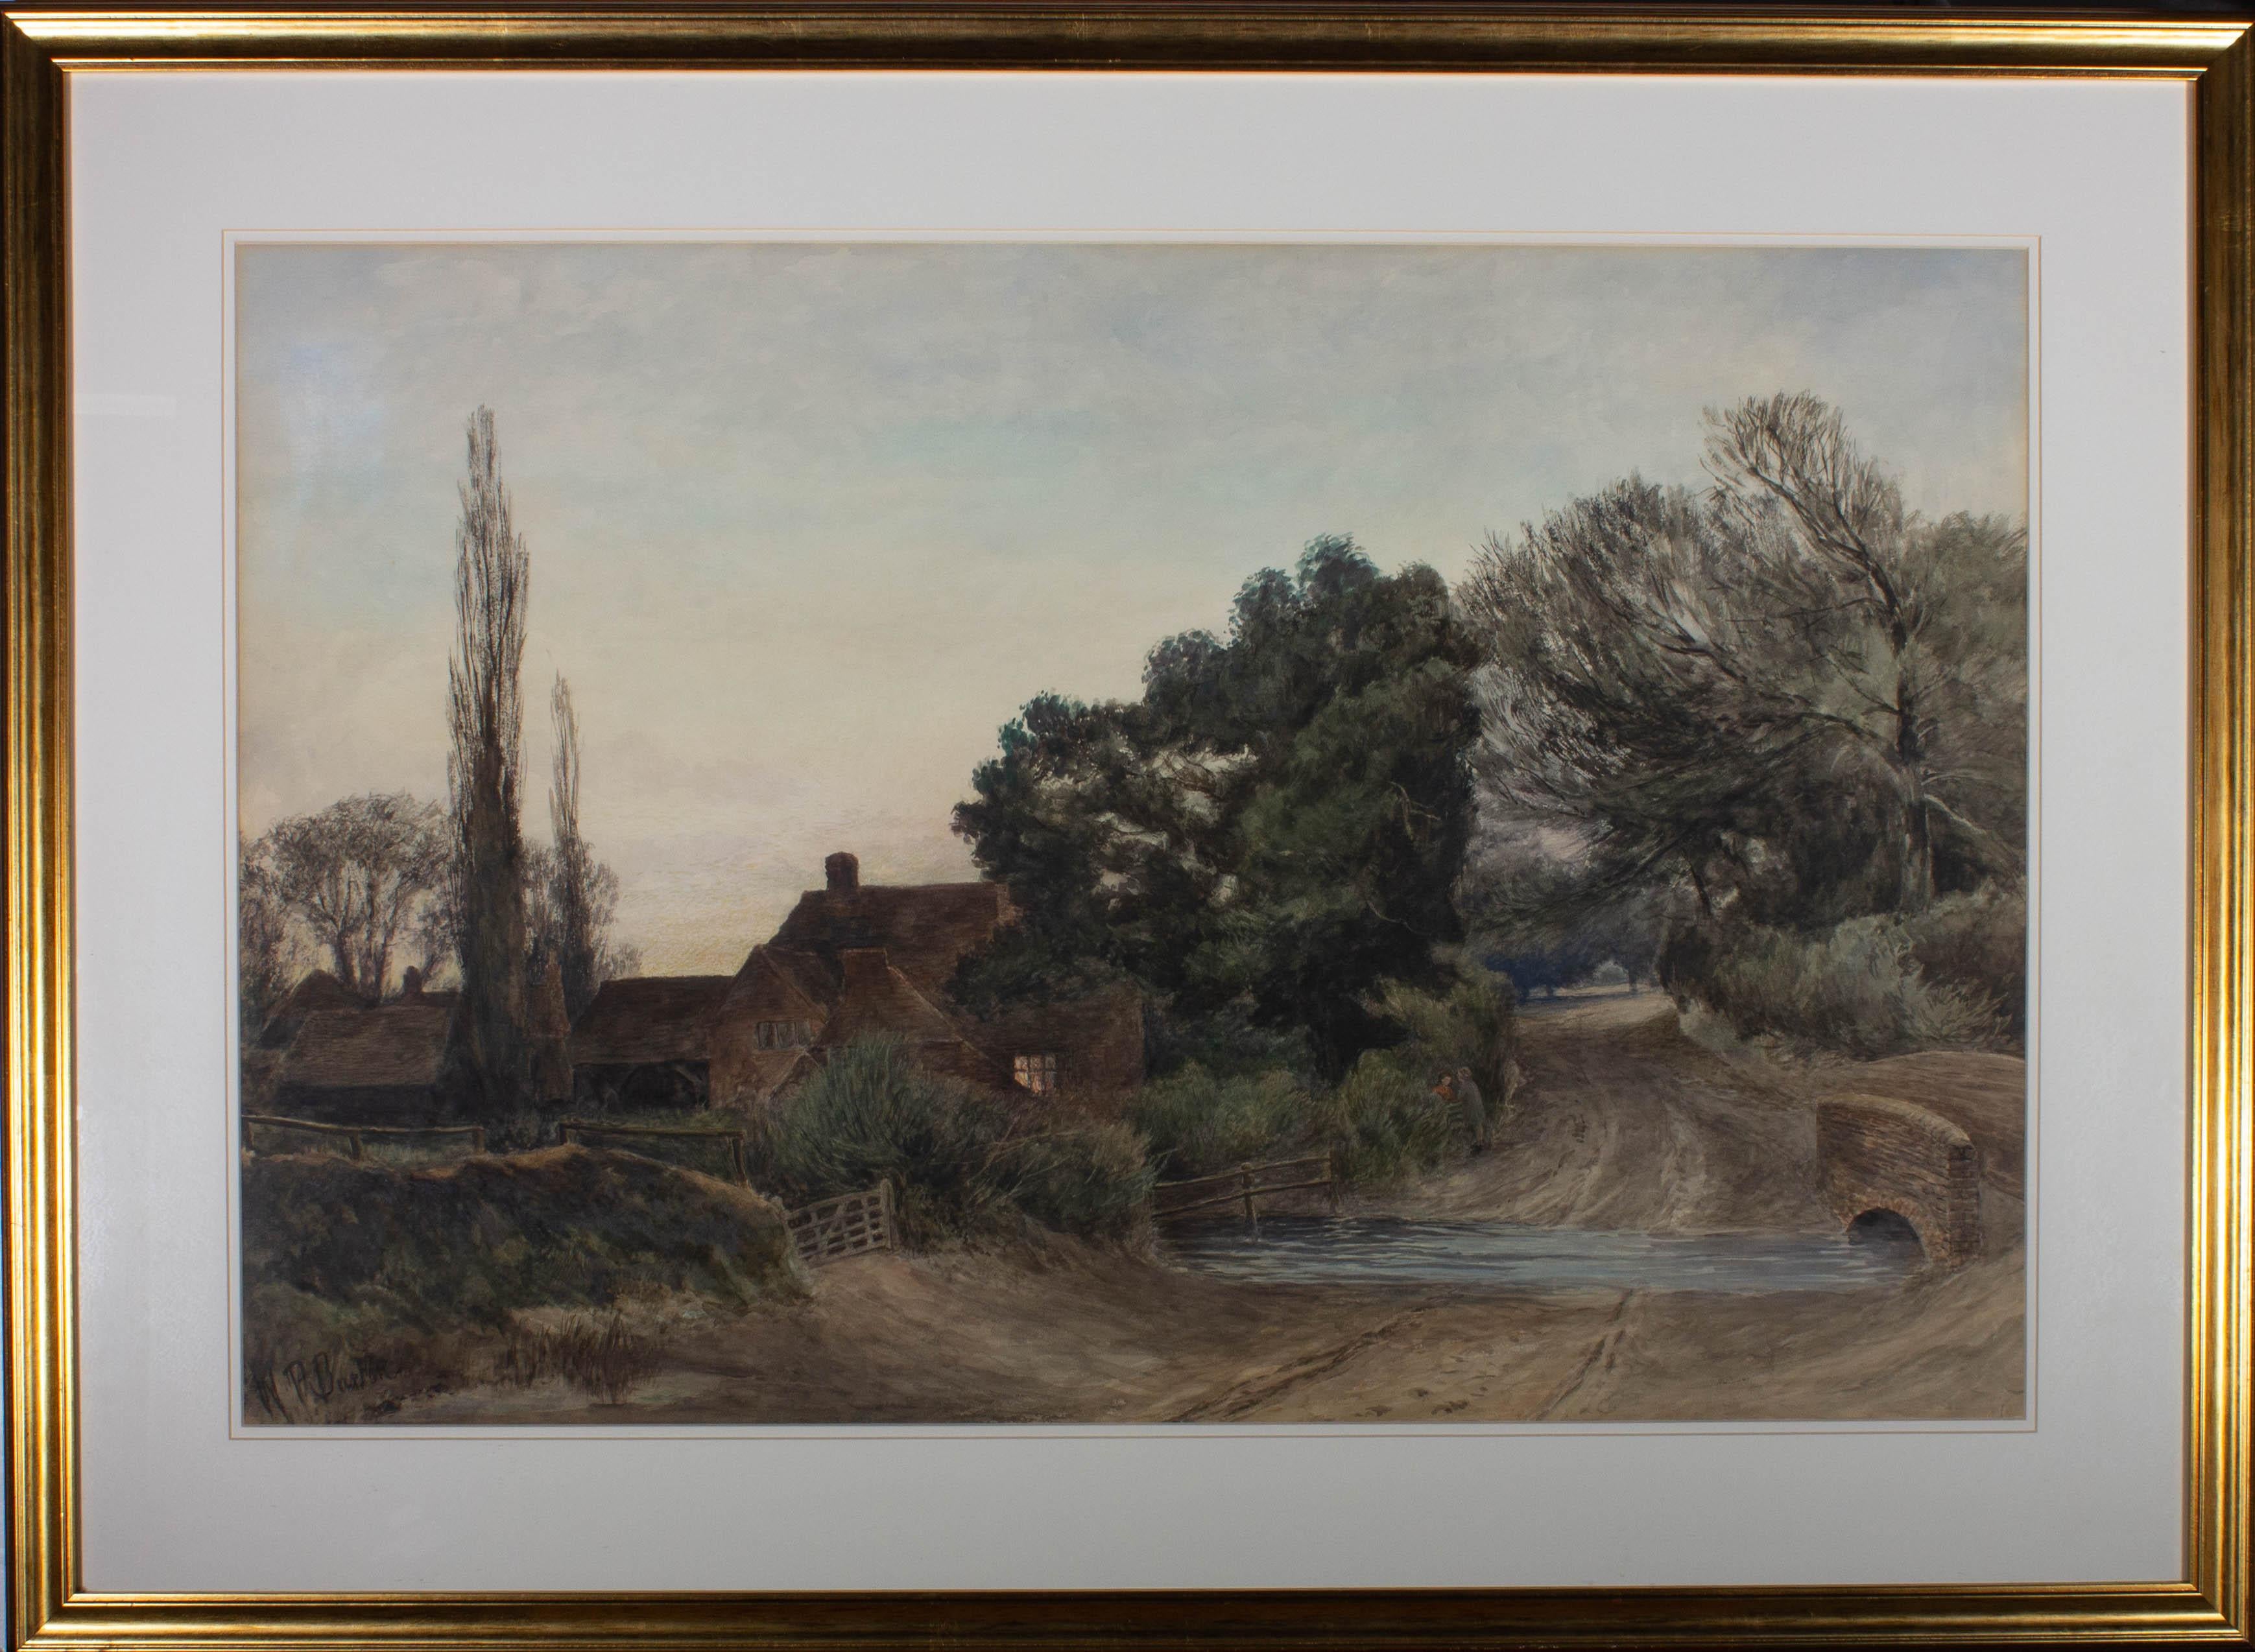 William Paton Burton (1828-1883) - Large Watercolour, The Farm by the Ford 1